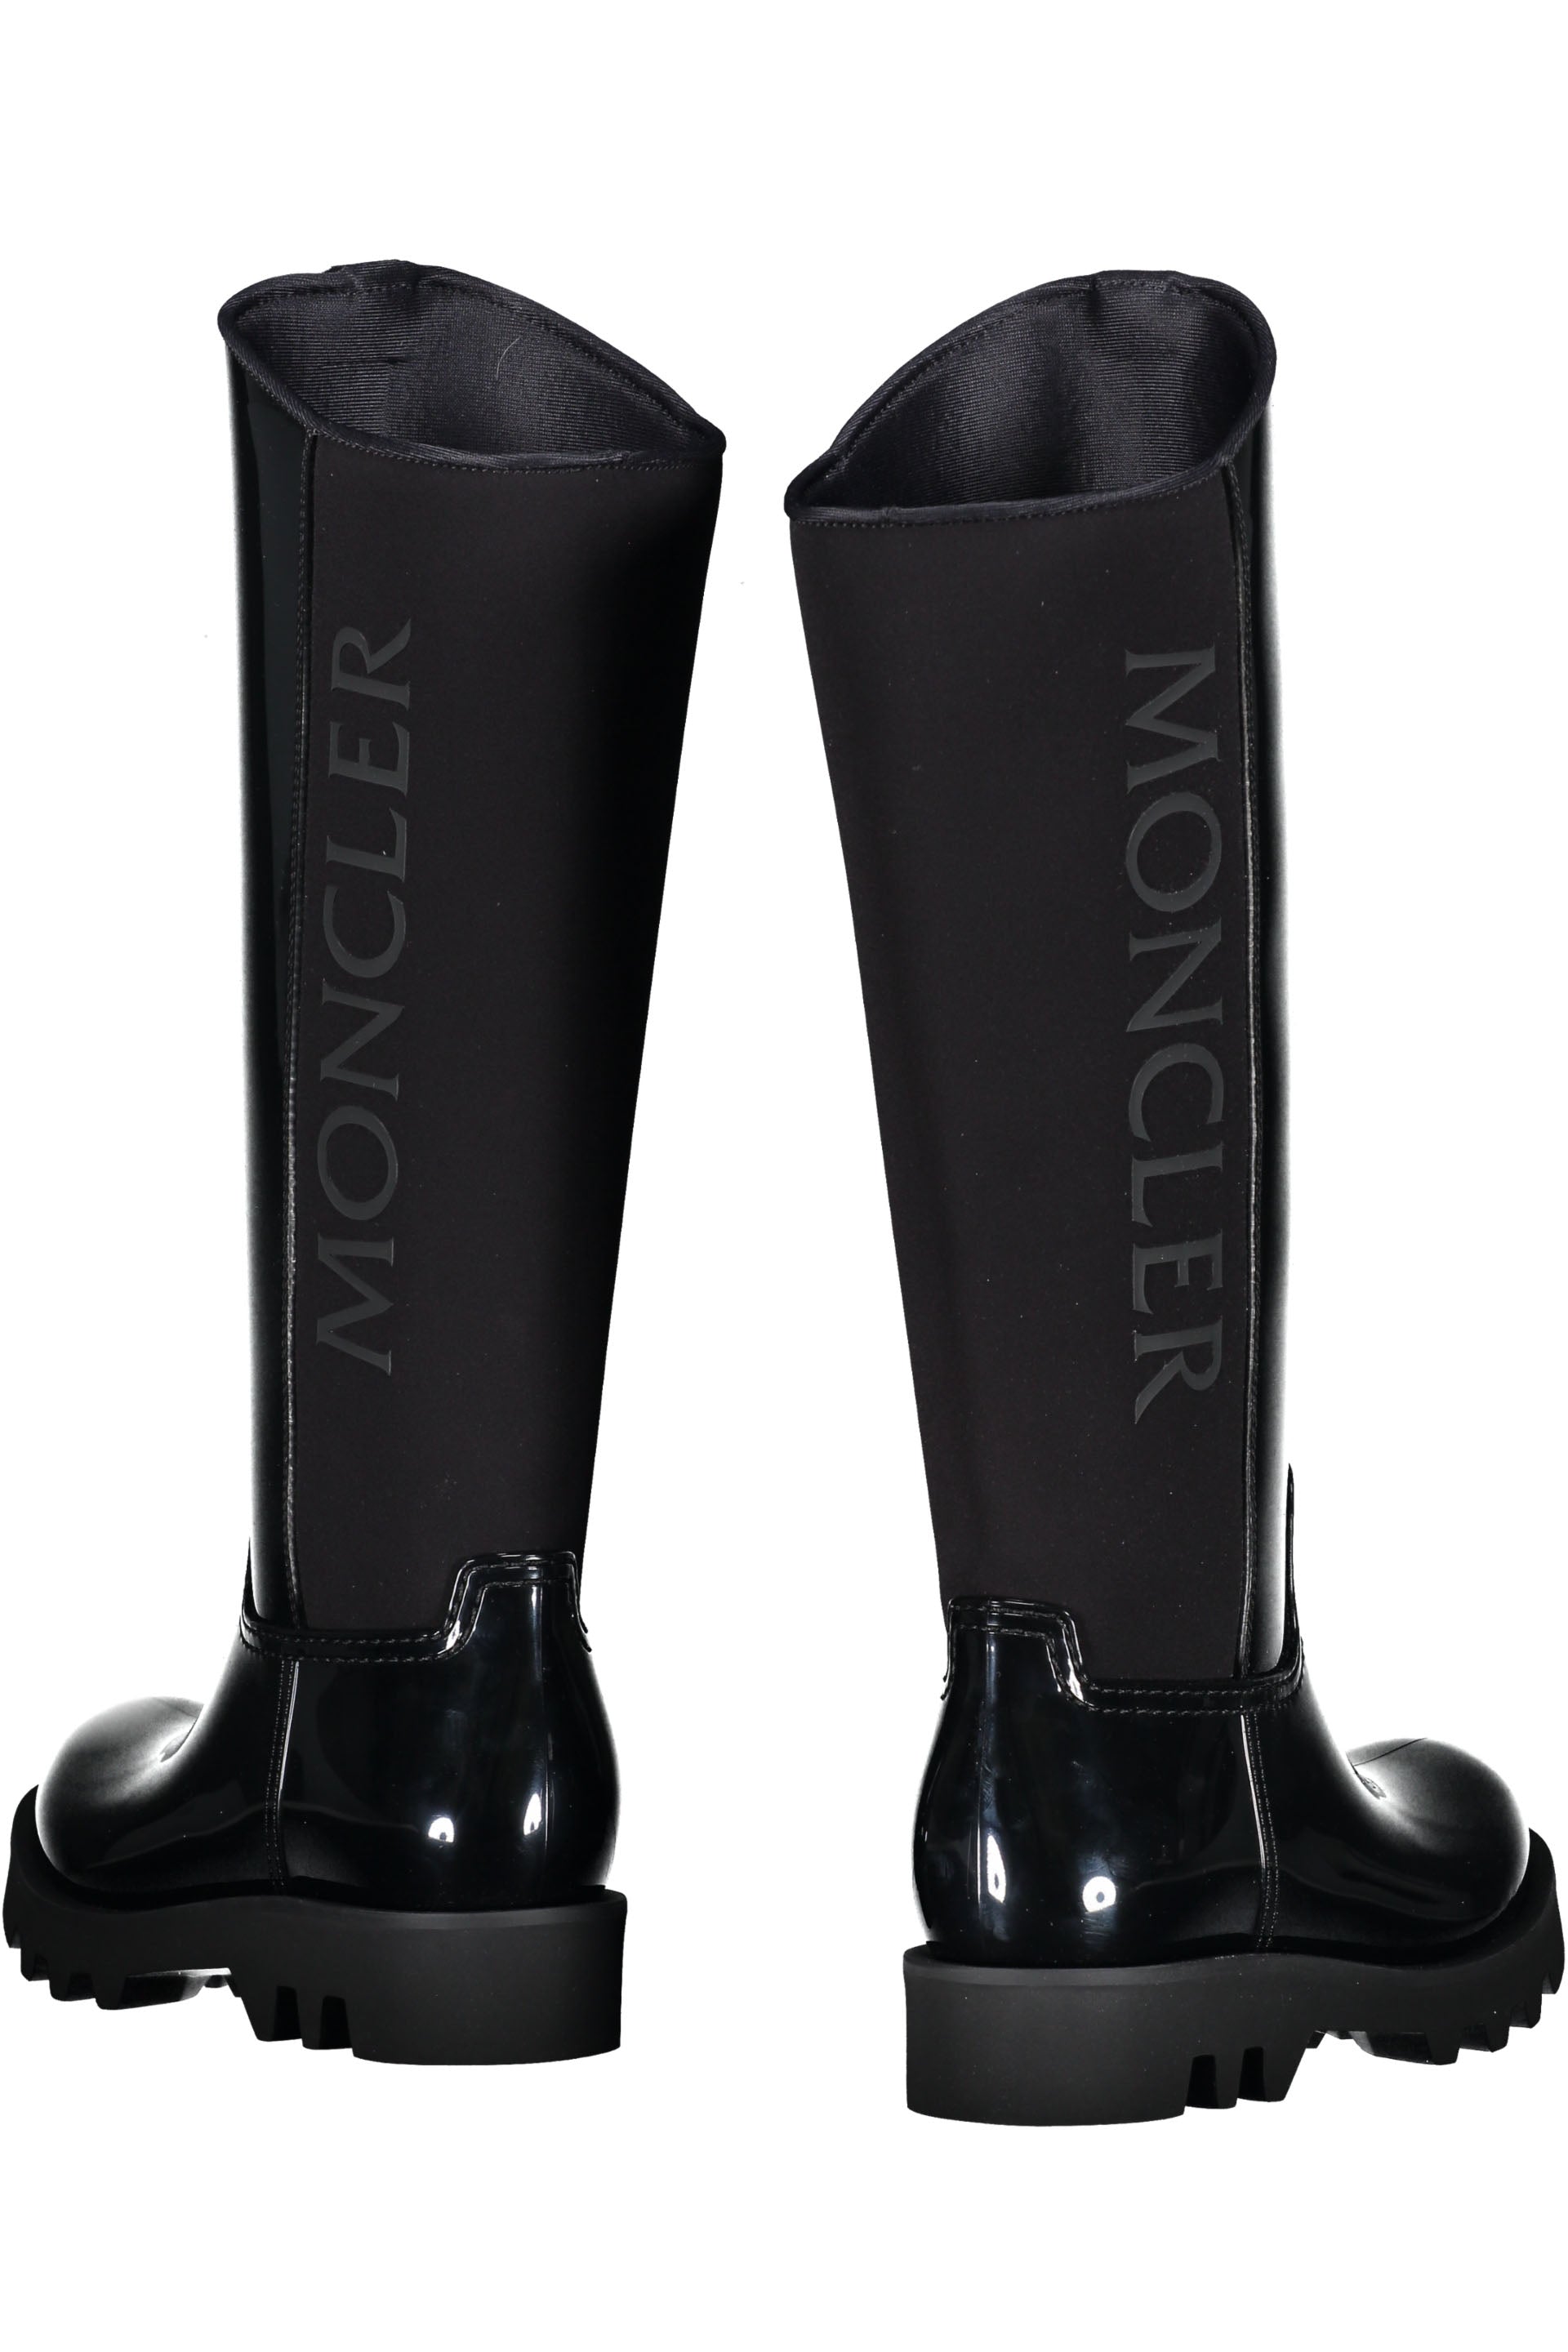 Moncler-OUTLET-SALE-Gilla-knee-boots-Stiefel-Stiefeletten-36-ARCHIVE-COLLECTION-4.jpg